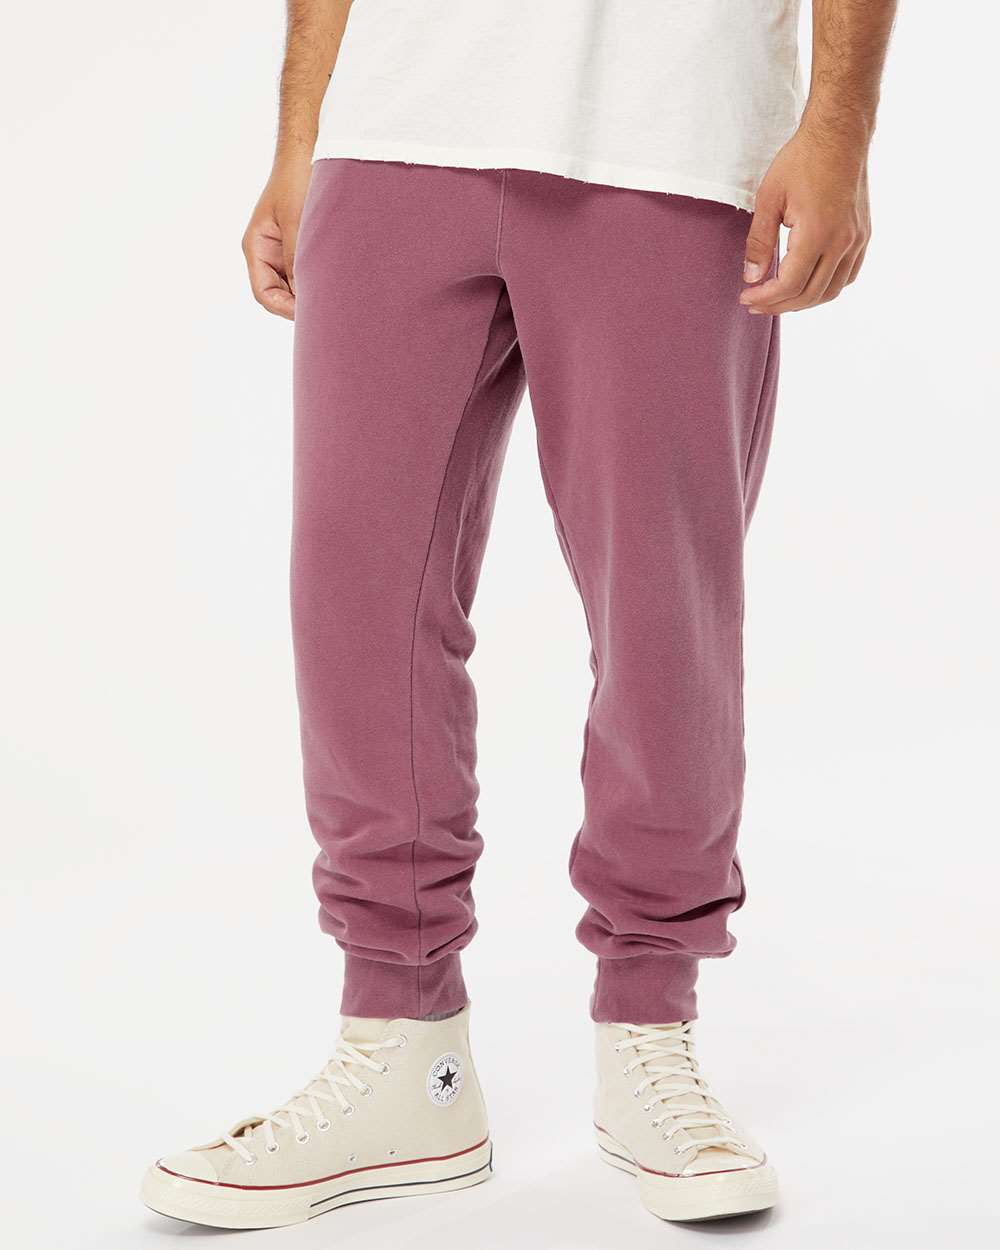 Independent Trading Co. Pigment-Dyed Fleece Pants PRM50PTPD #colormdl_Pigment Maroon